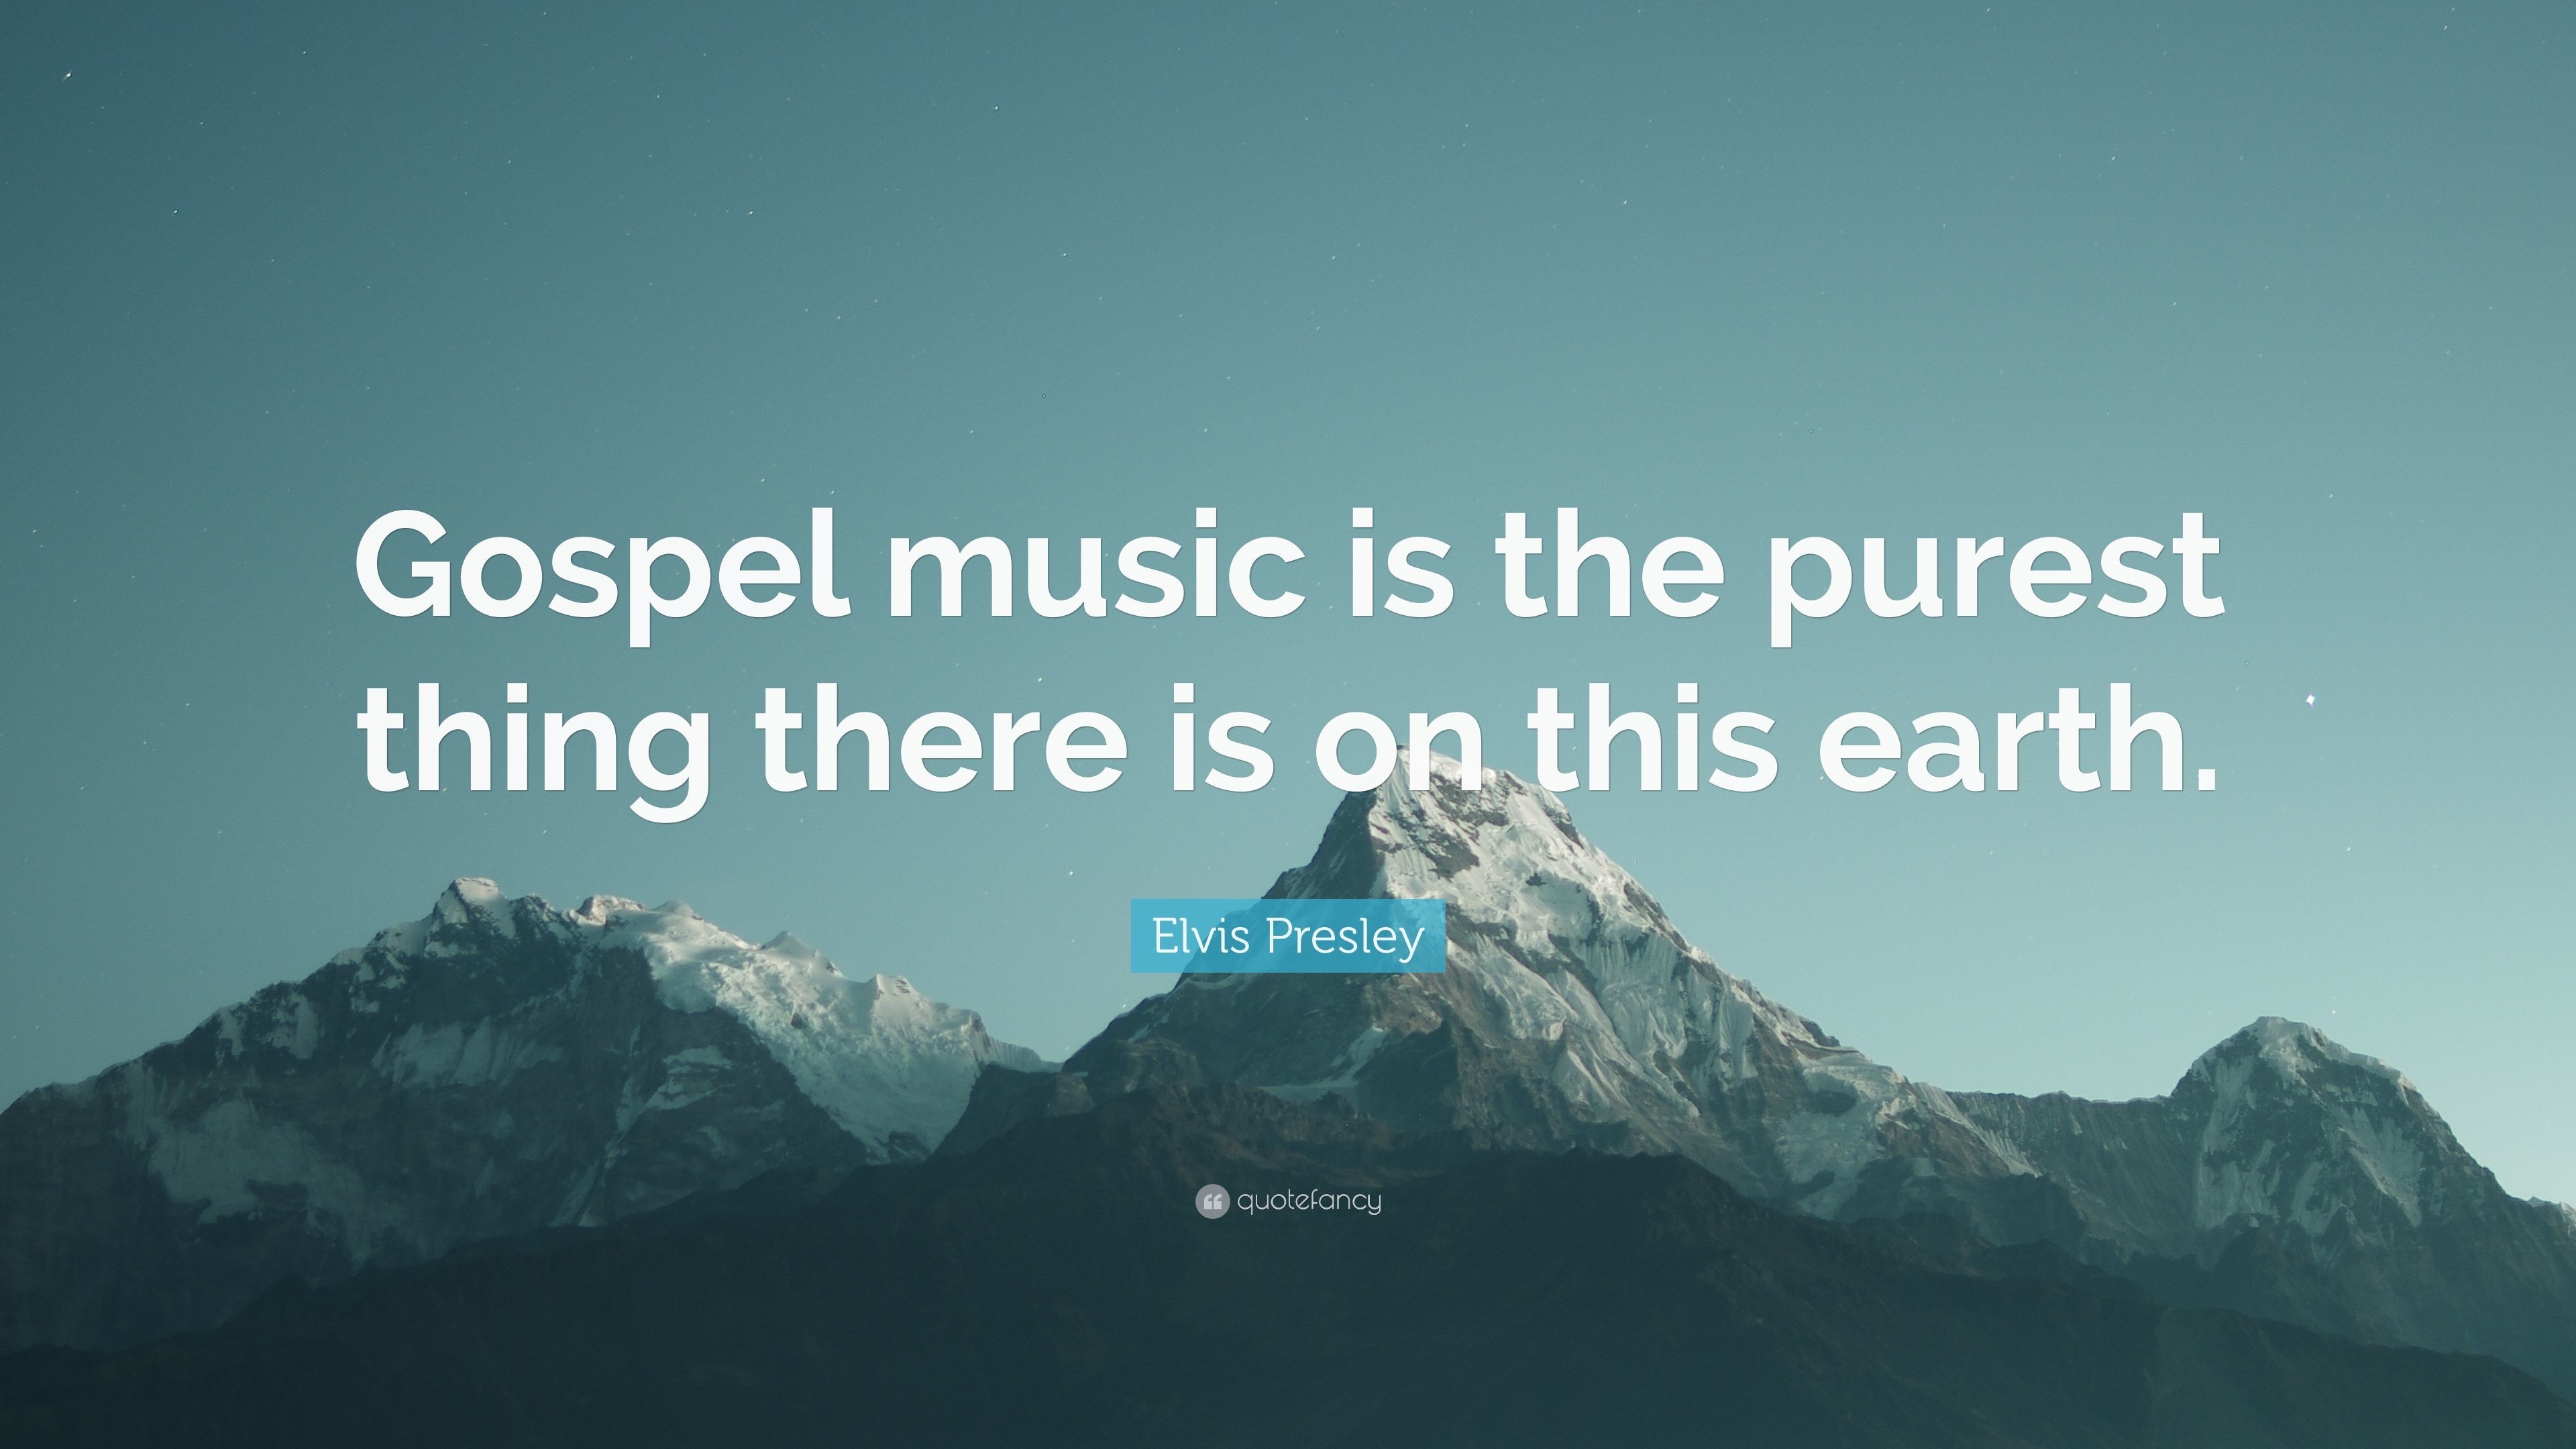 3840x2160 Elvis Presley Quote: “Gospel music is the purest thing there is on this  earth